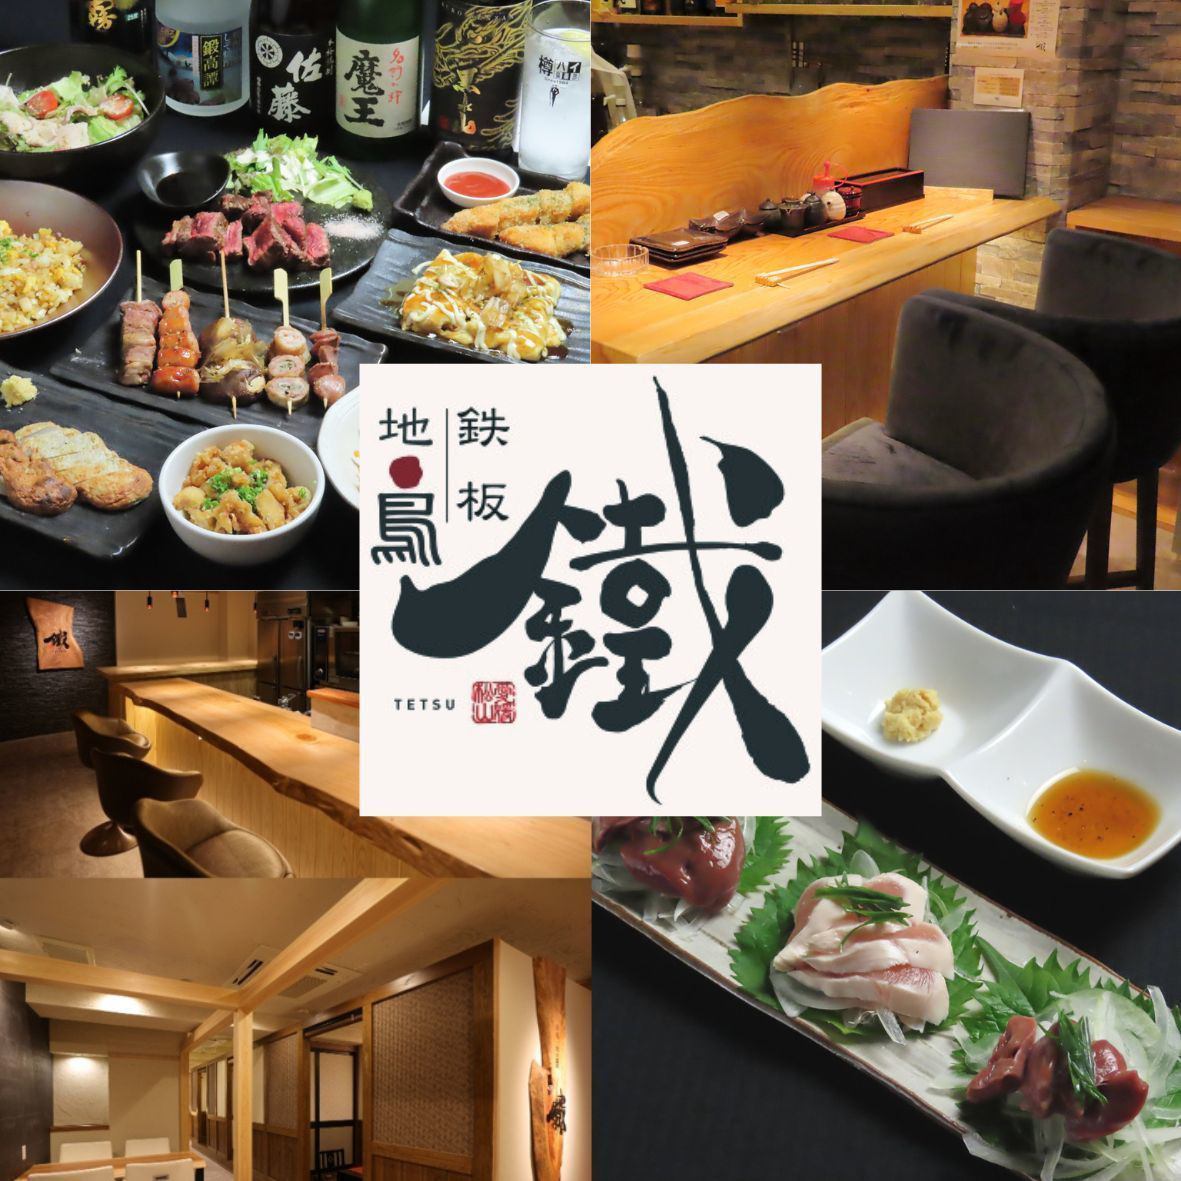 Newly opened on June 26! [Complete with private rooms] An izakaya where you can enjoy special local chicken, yakitori, and teppanyaki